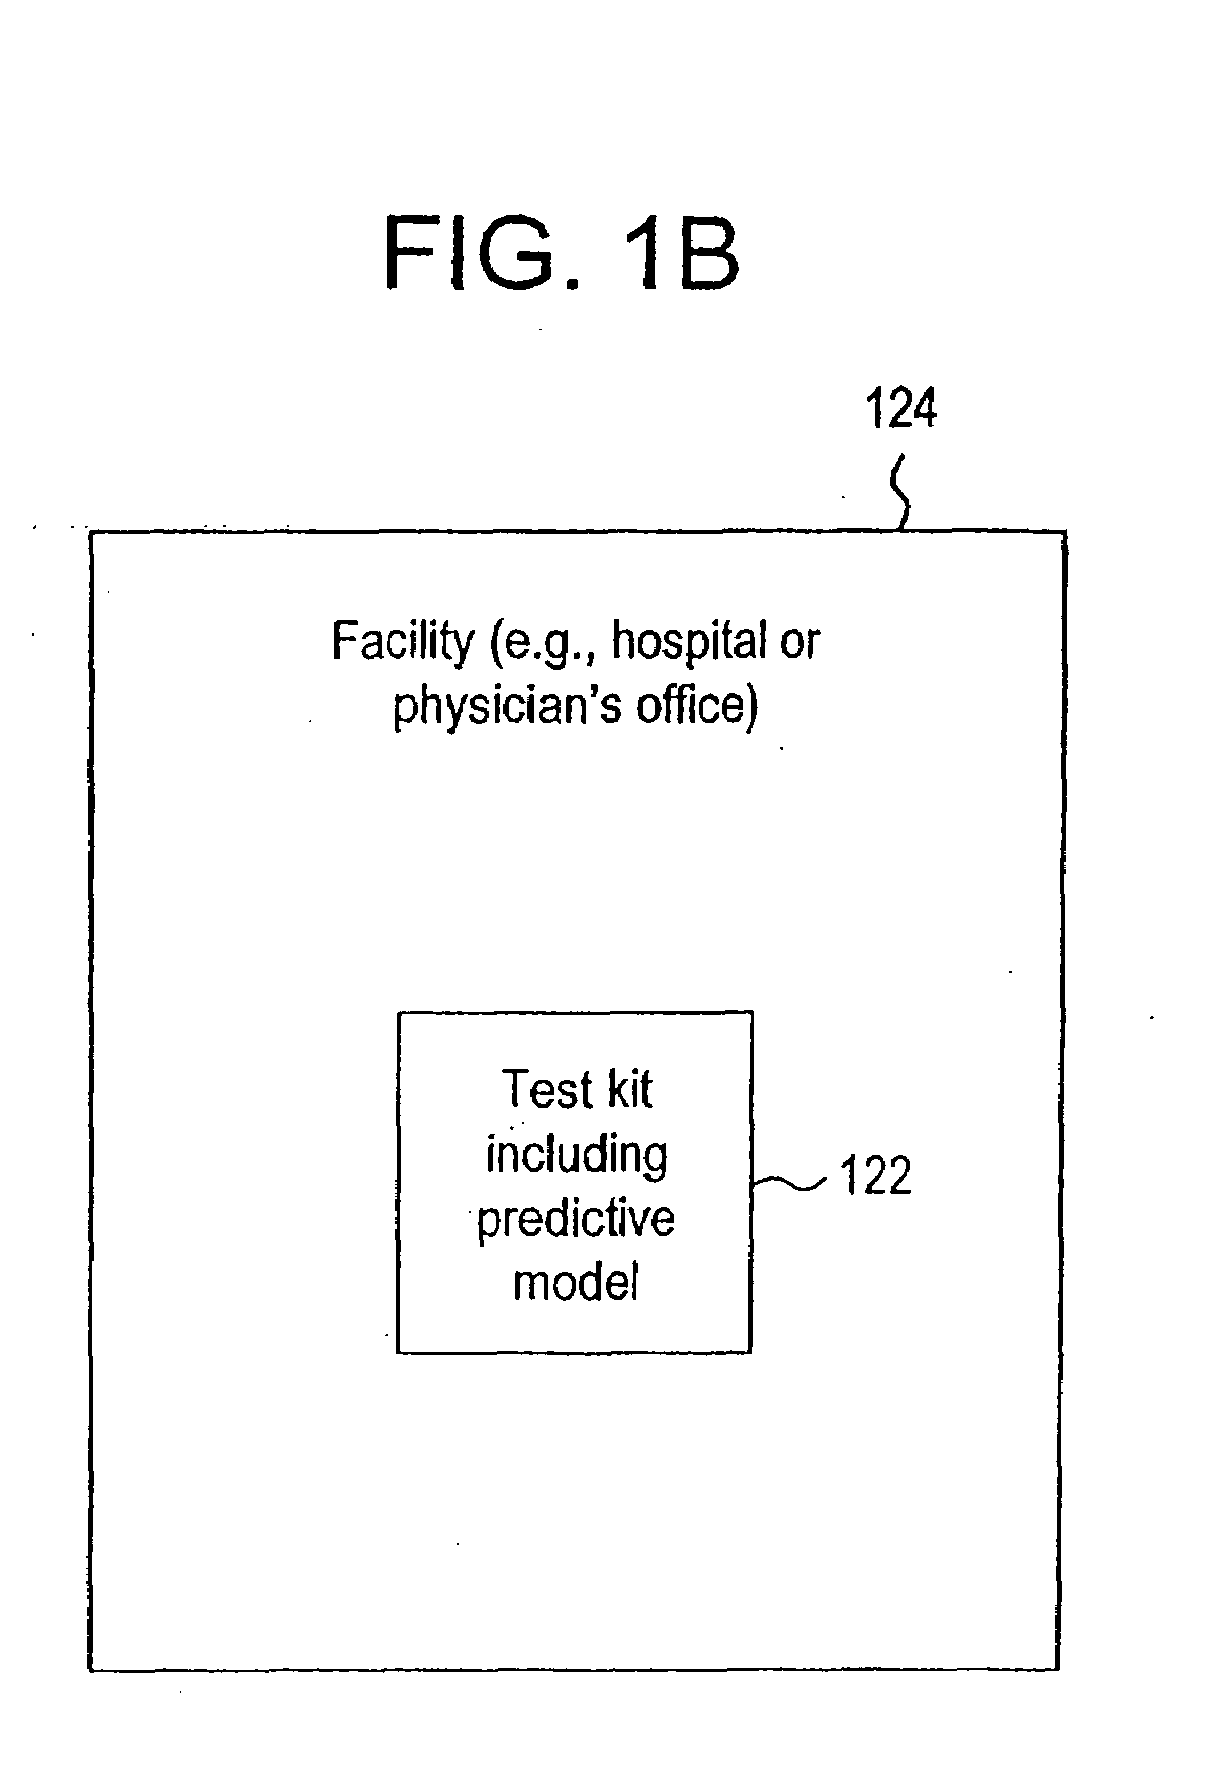 Systems and methods for treating diagnosing and predicting the occurrence of a medical condition